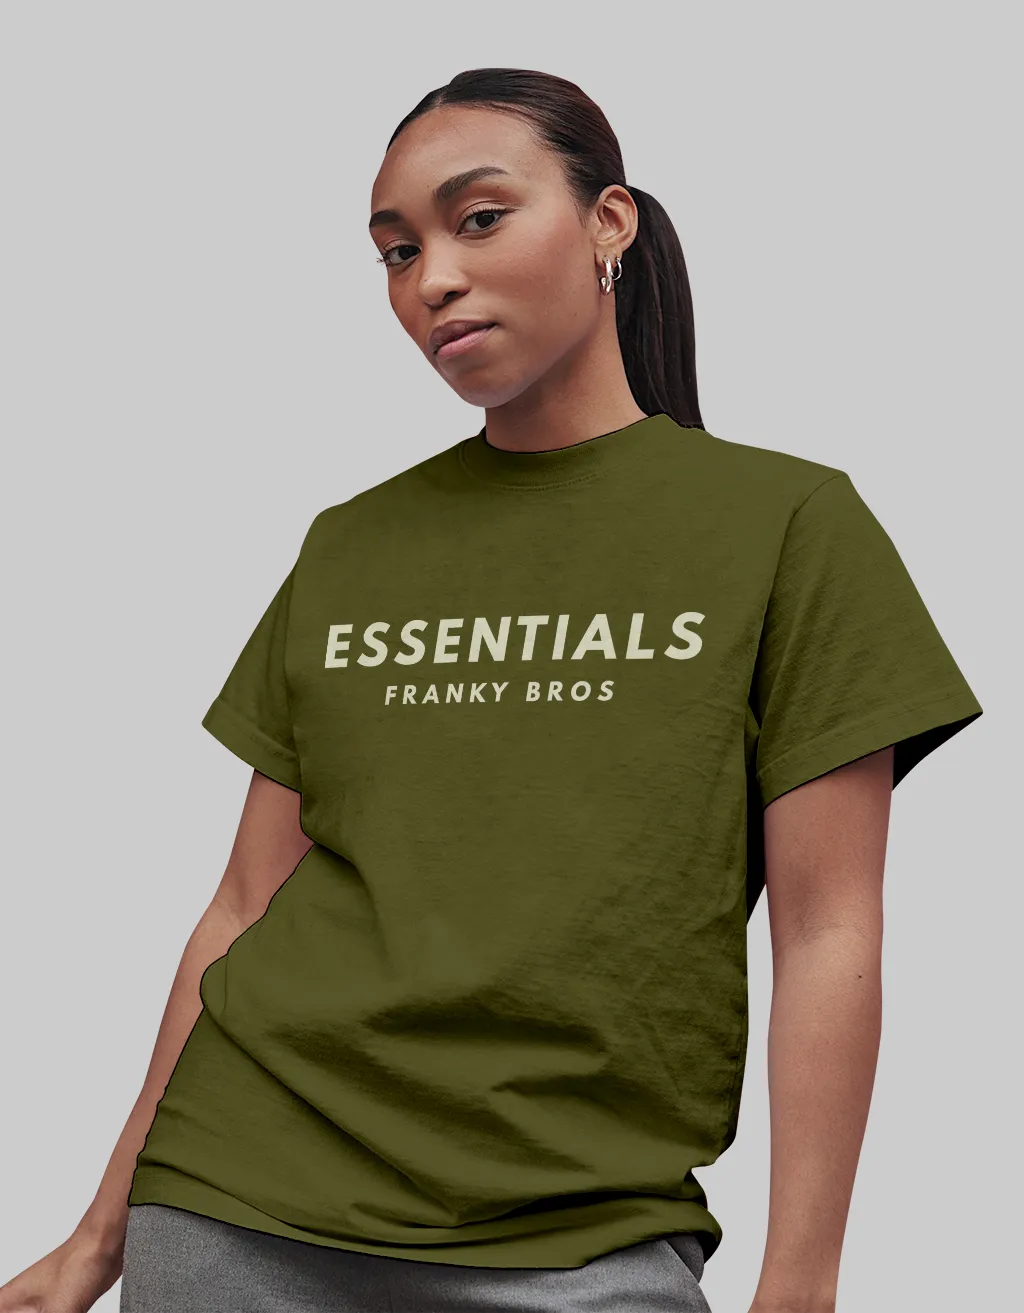 Buy Essentials T shirt for Men and Women Online in India